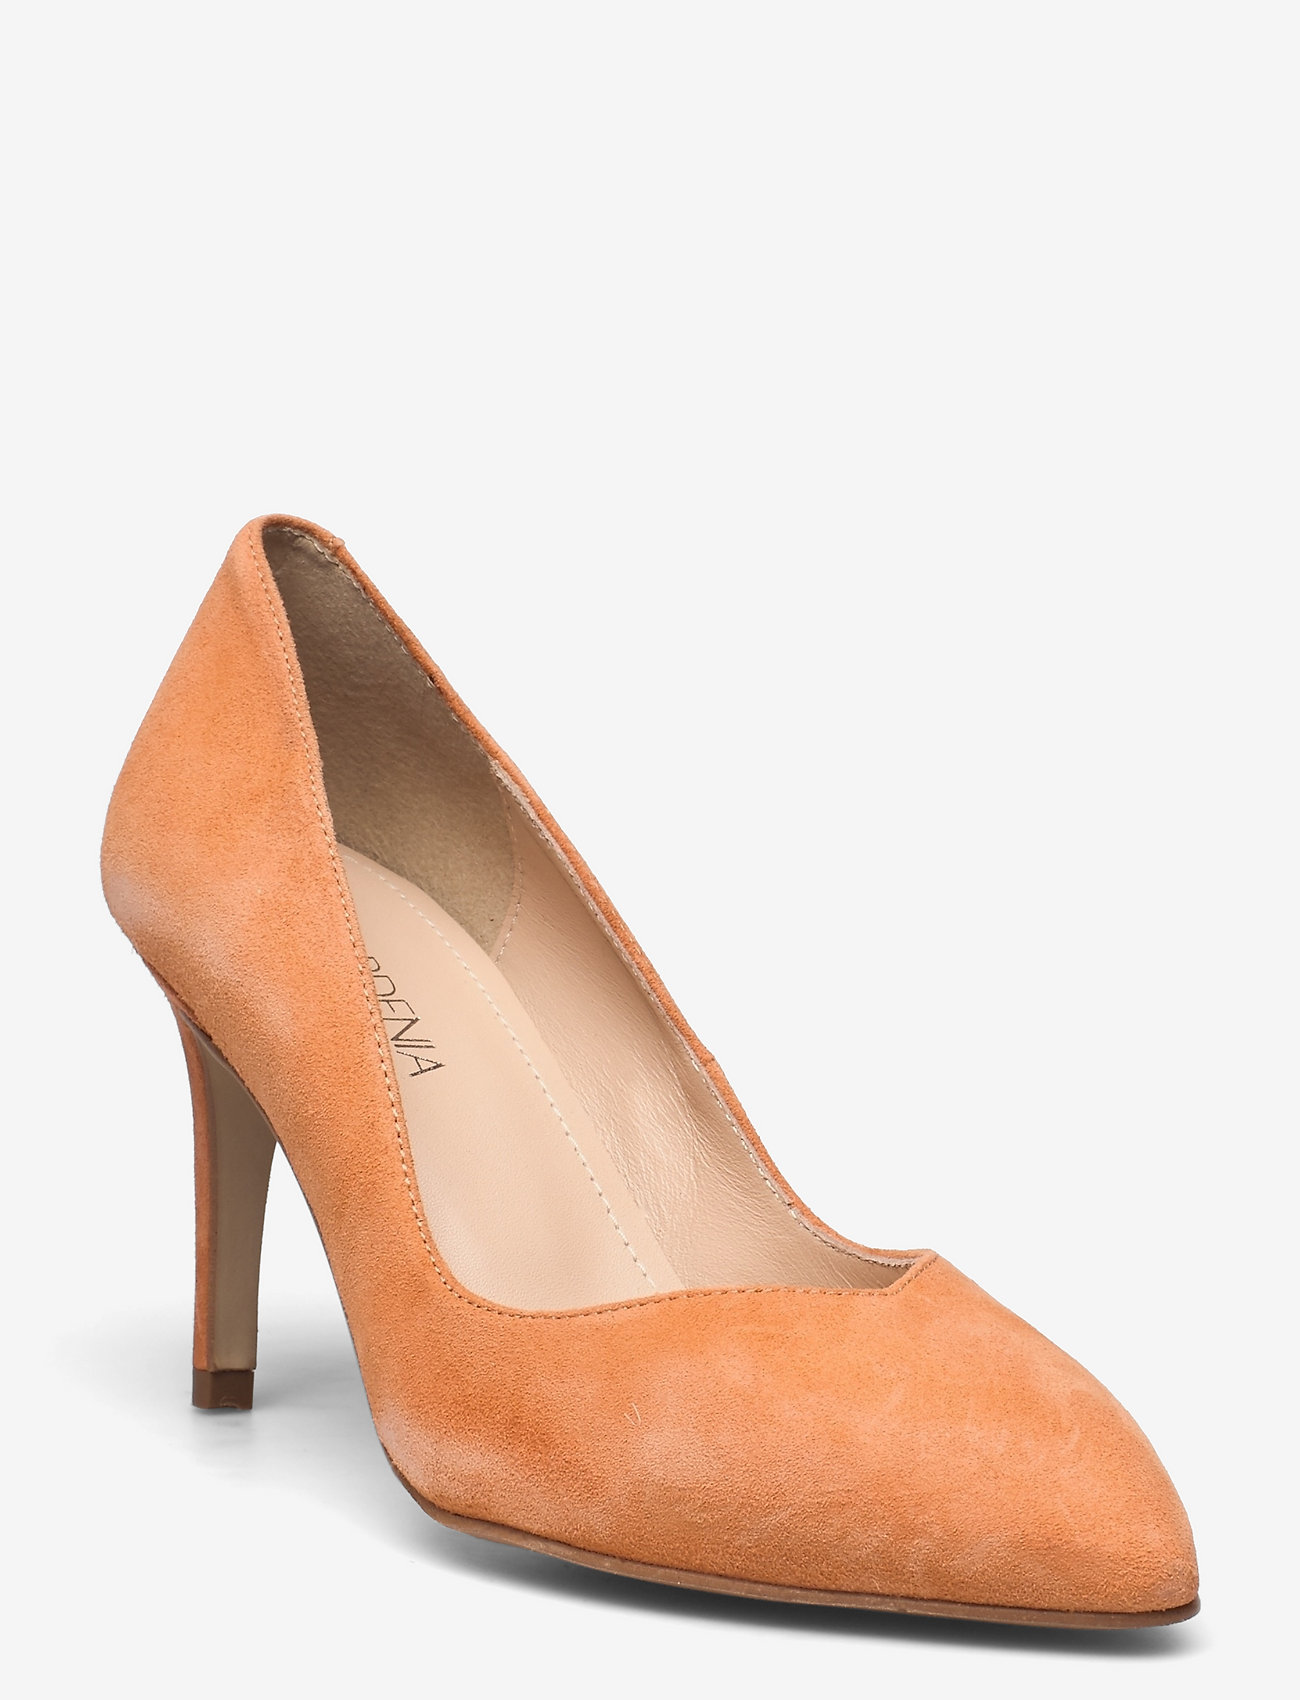 Gardenia - Oakleigh Goat Suede - party wear at outlet prices - mandarin - 0